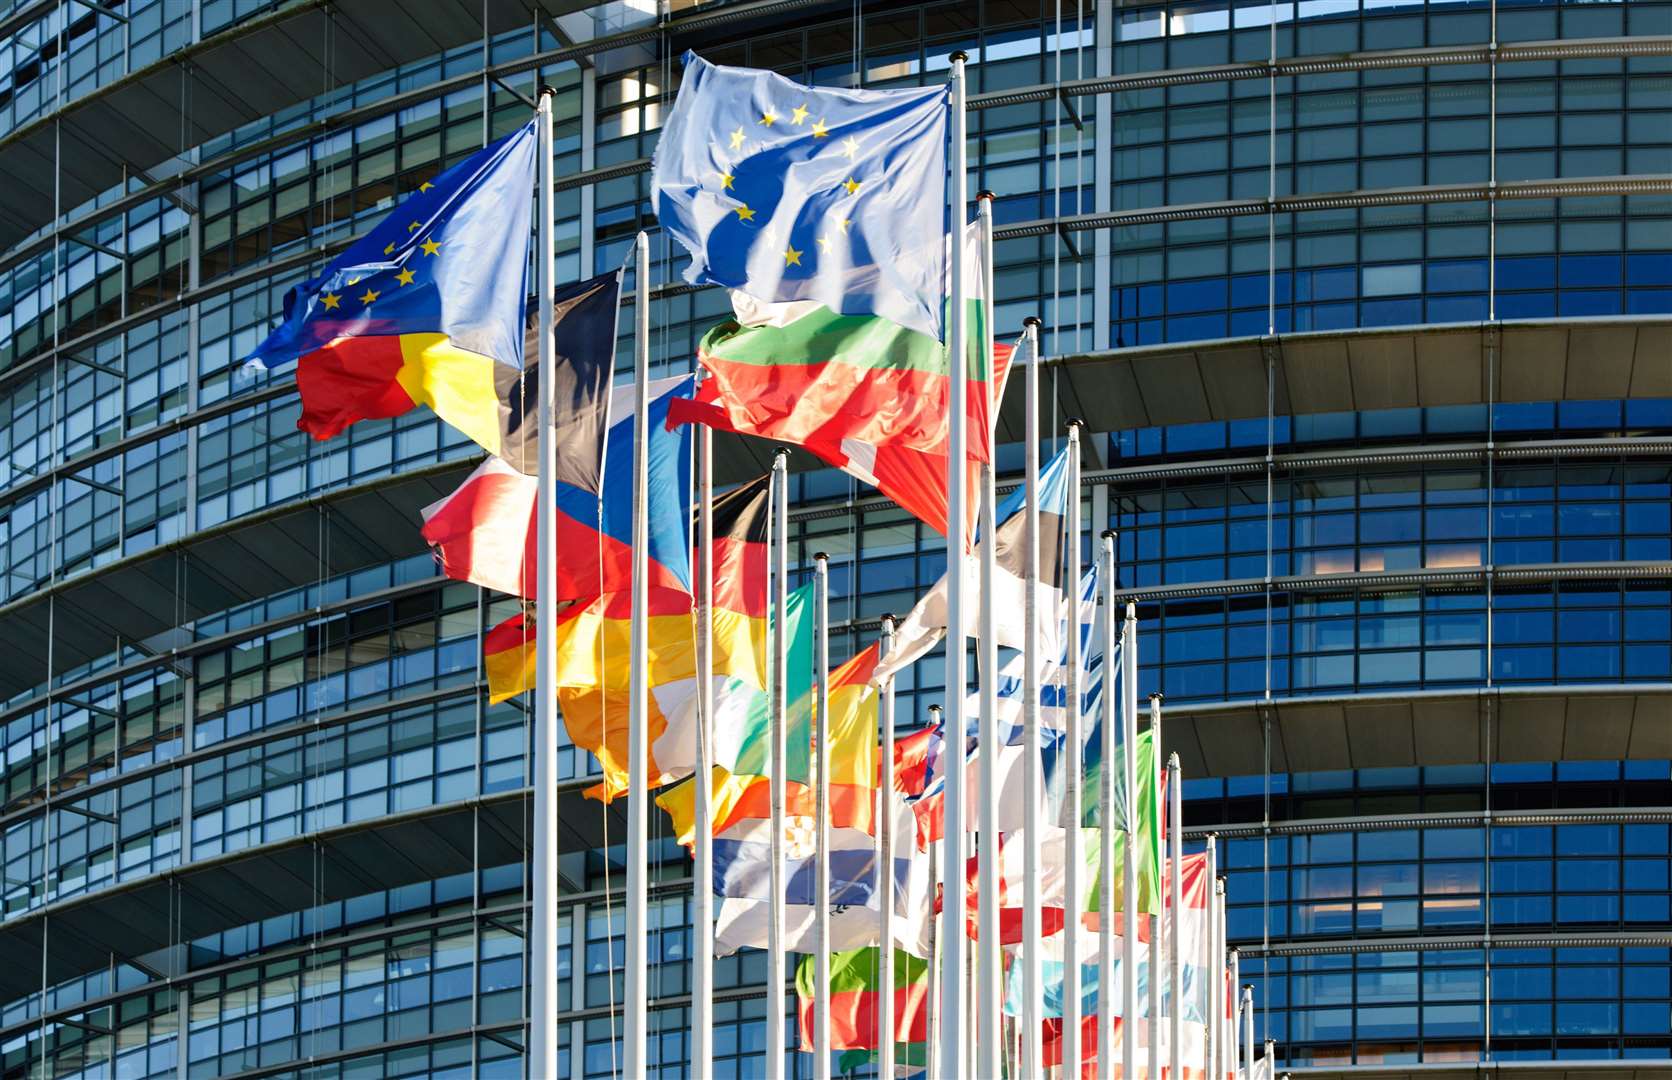 European Union flags in a row waving in front of the European Parliament building in Strasbourg